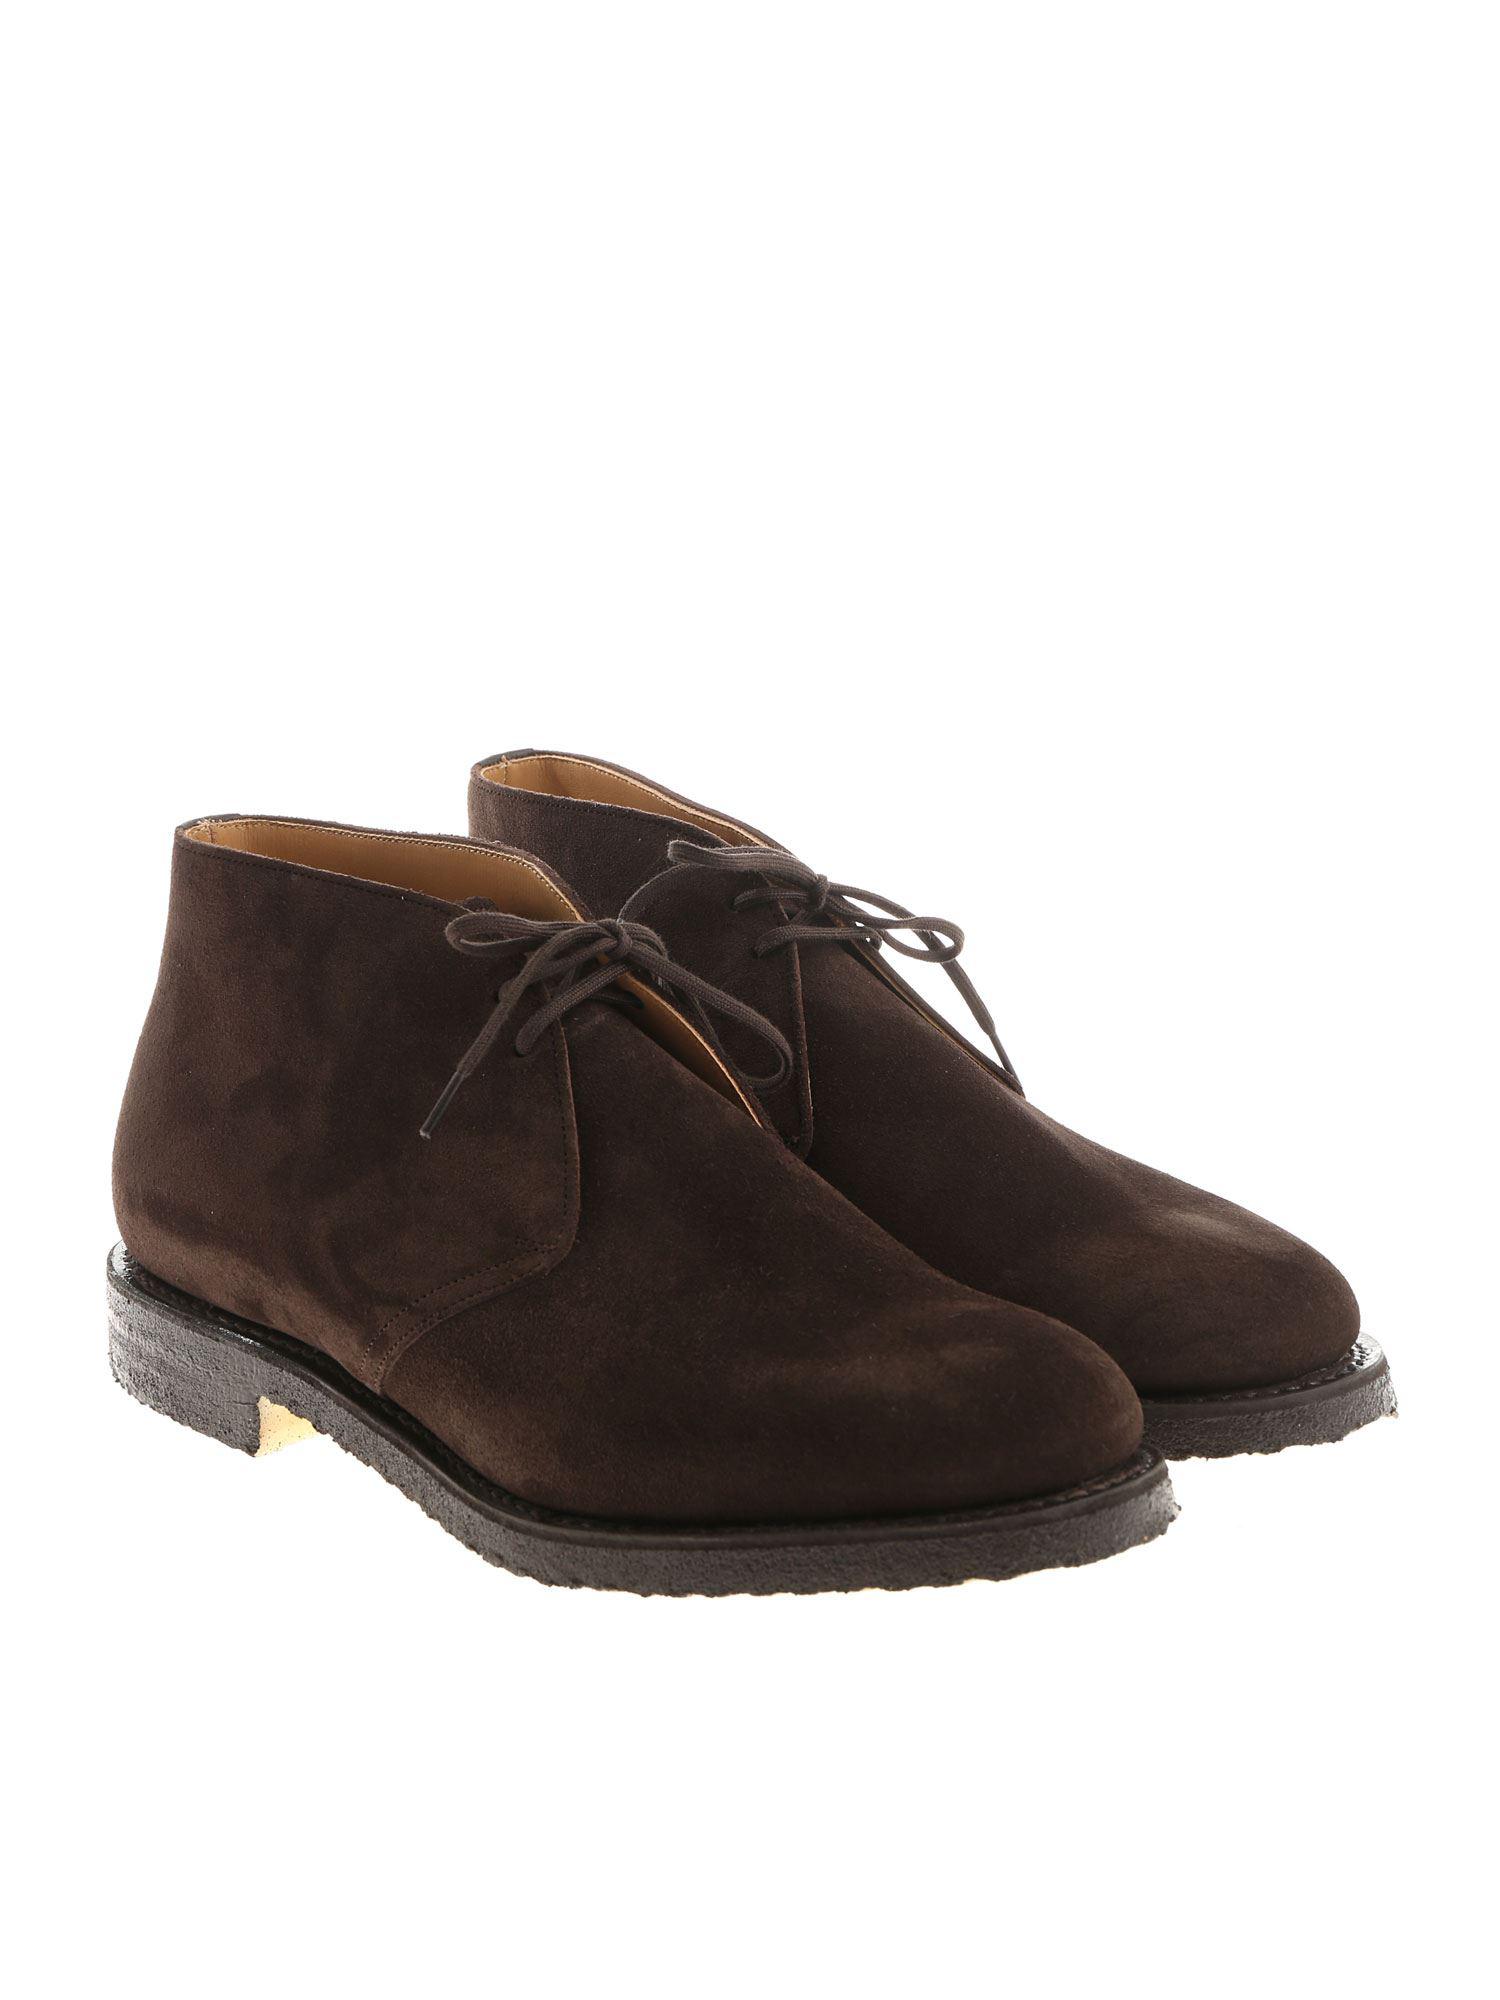 Church's Suede Brown Ryder Desert Shoes for Men - Lyst